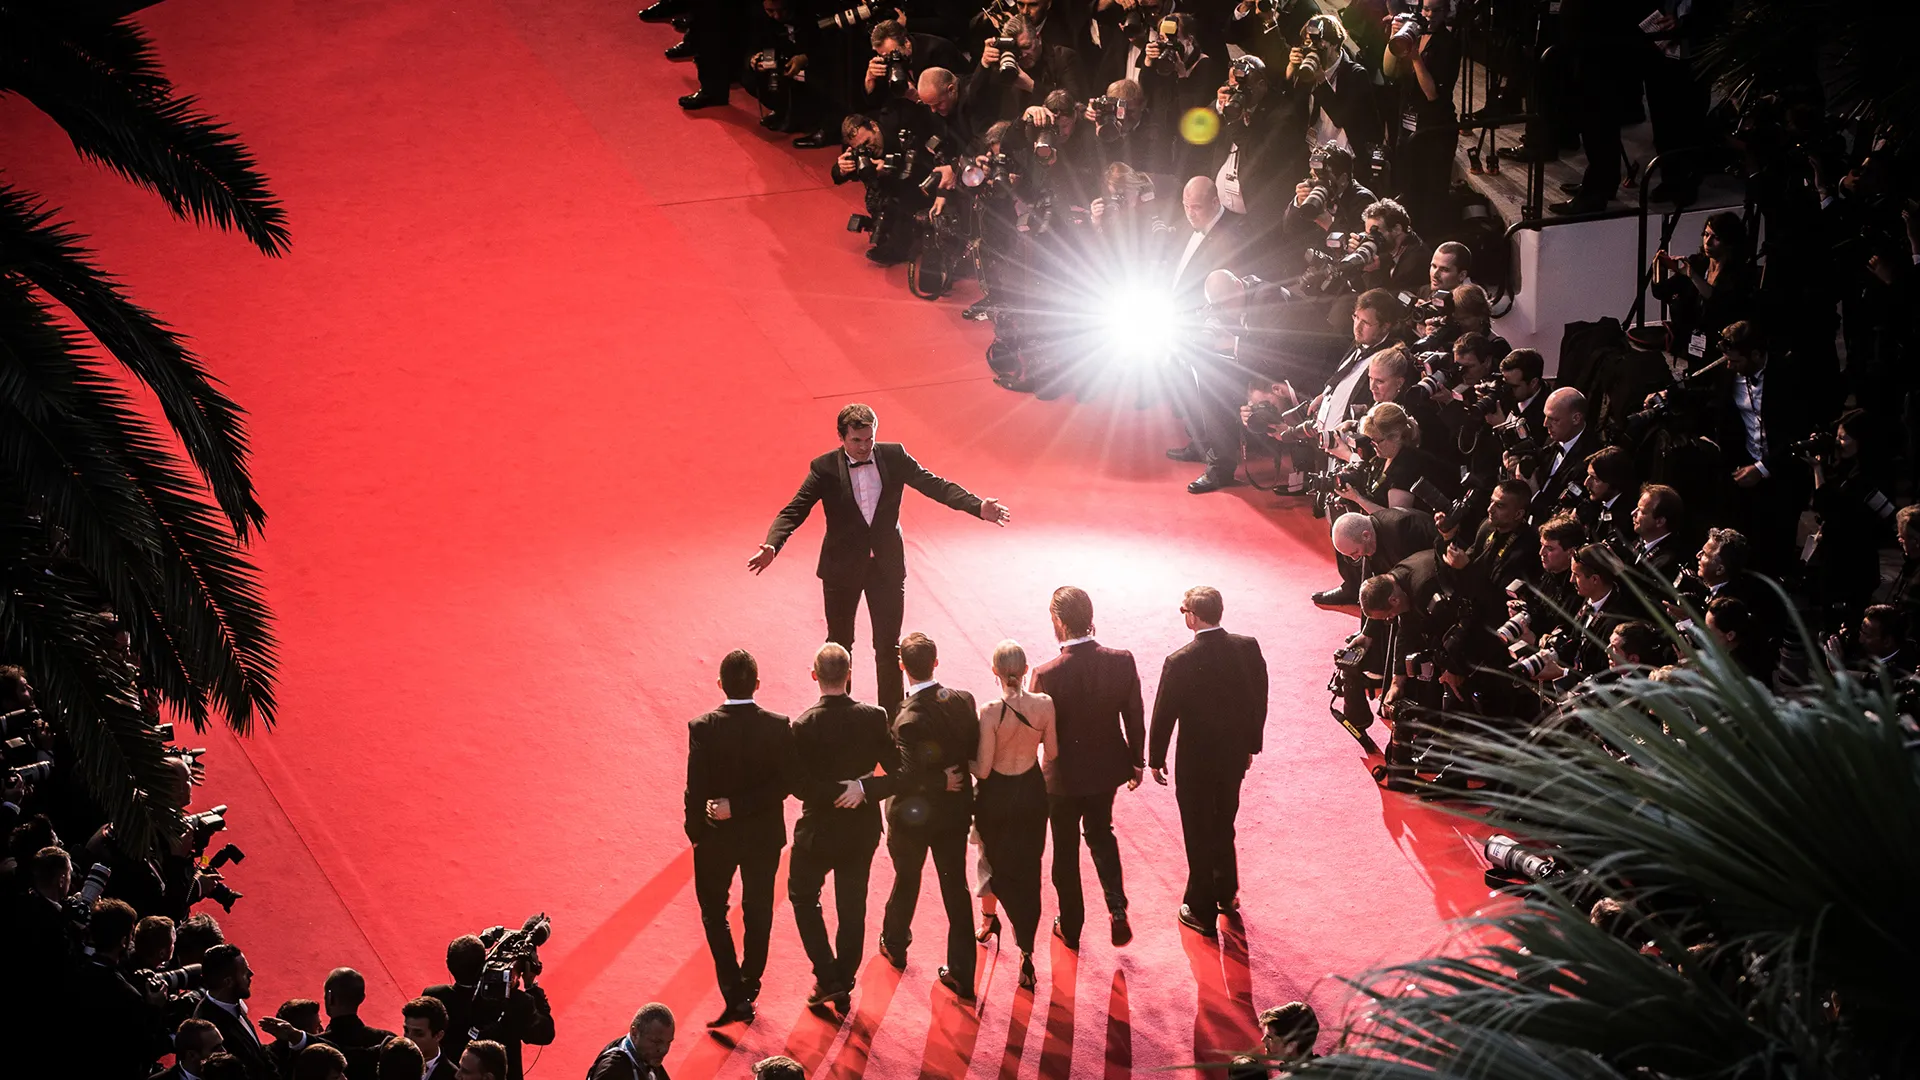 How to buy Cannes Film Festival tickets